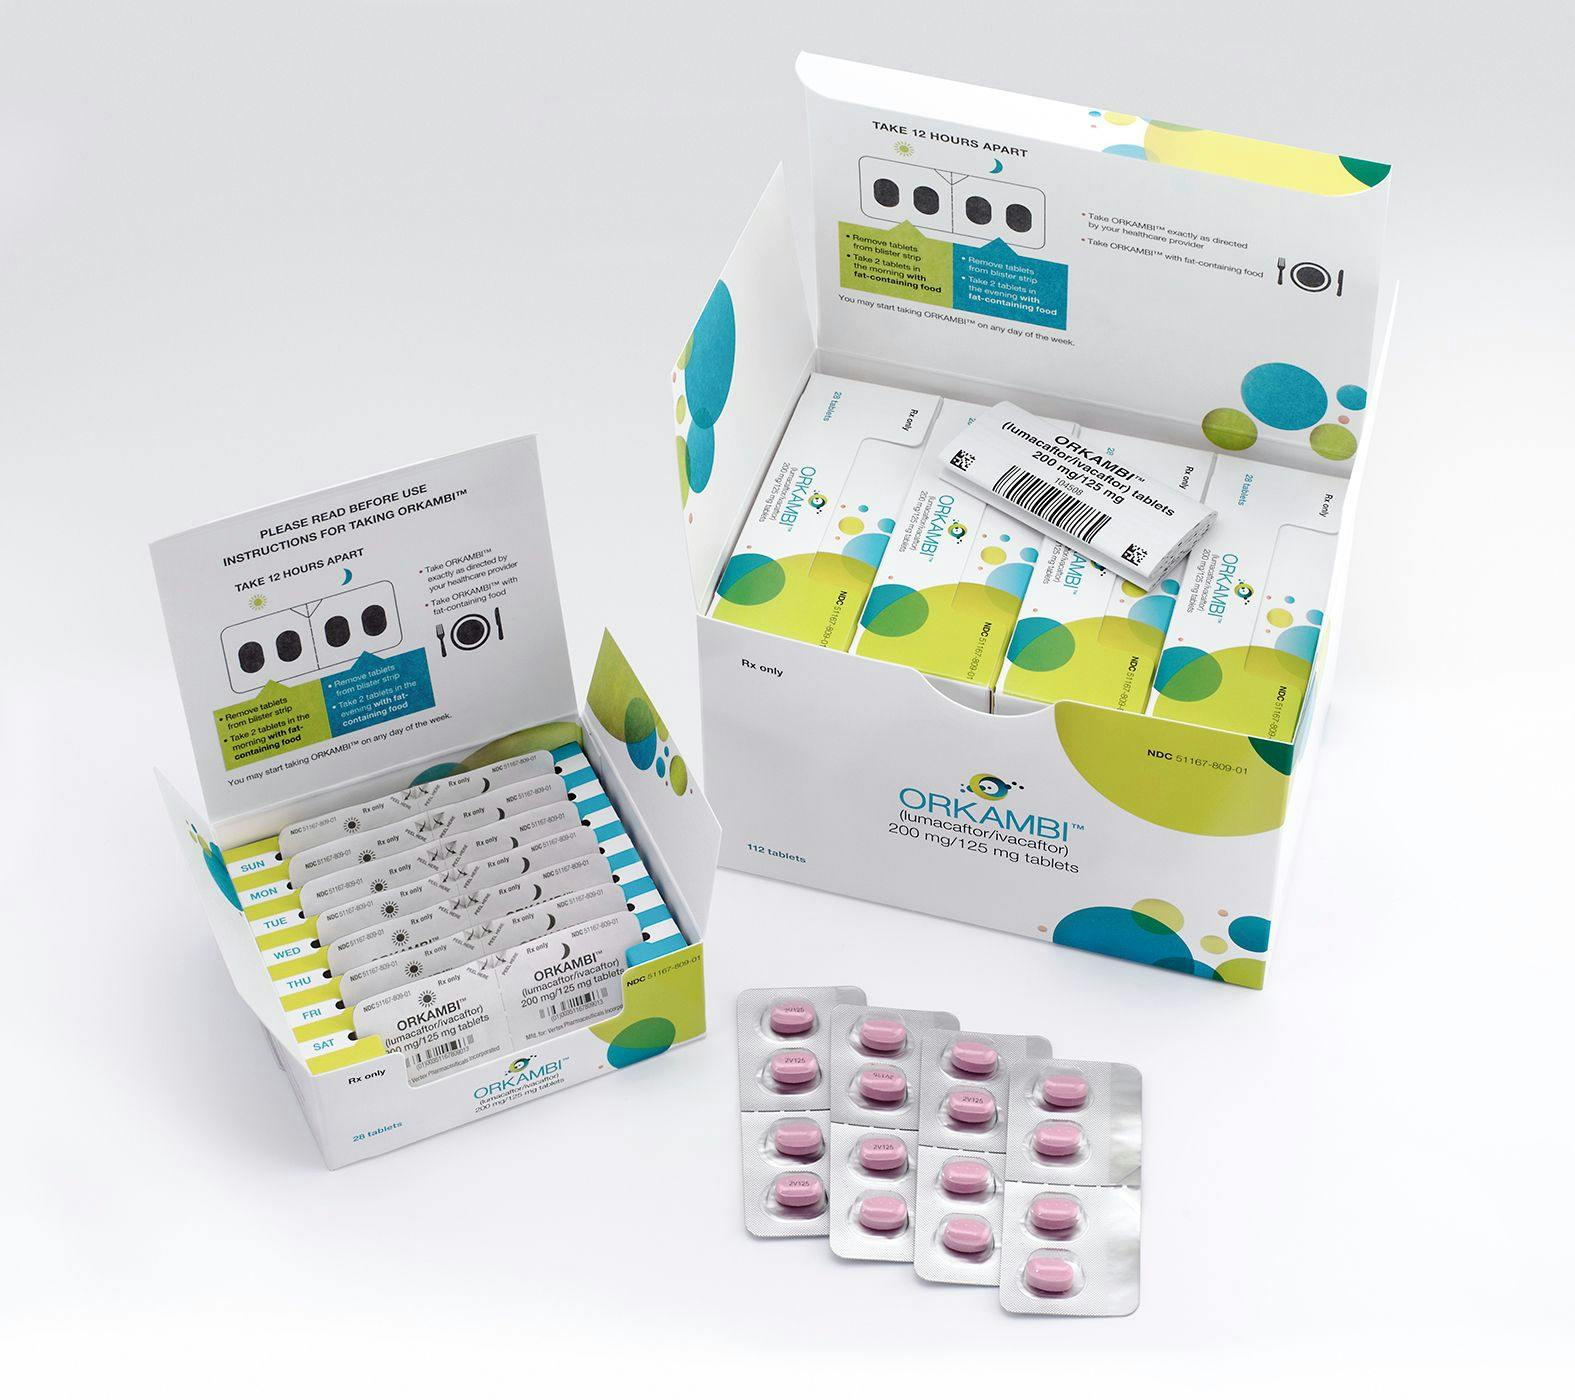 Vertex’ Orkambi medication package is Compliance Package of the Year